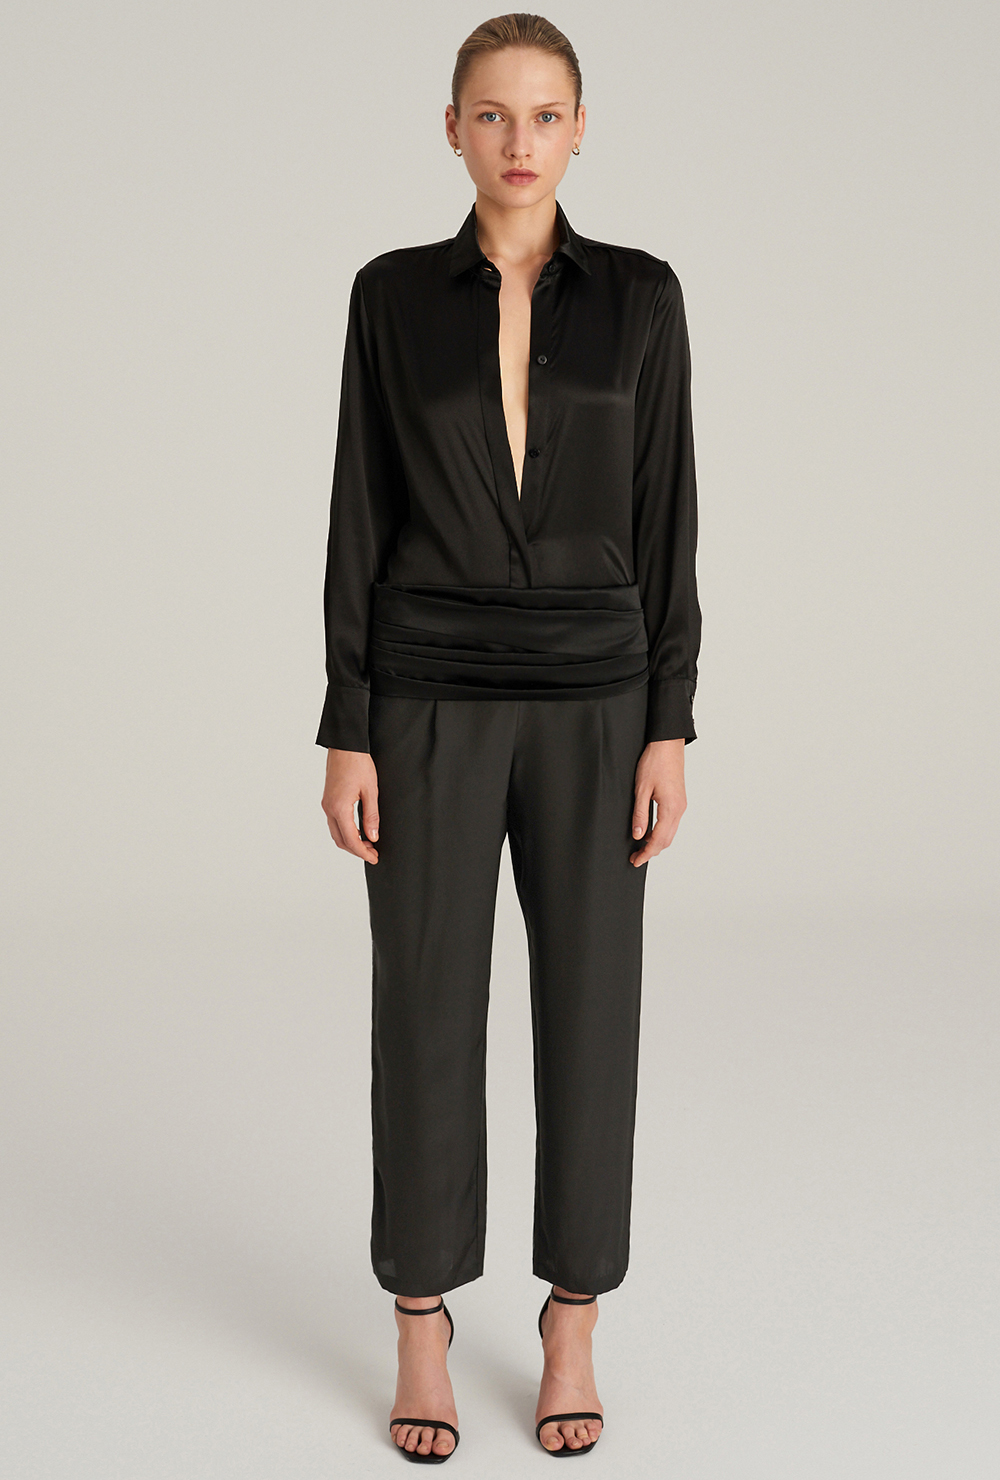 Black silk trousers from reversed satin